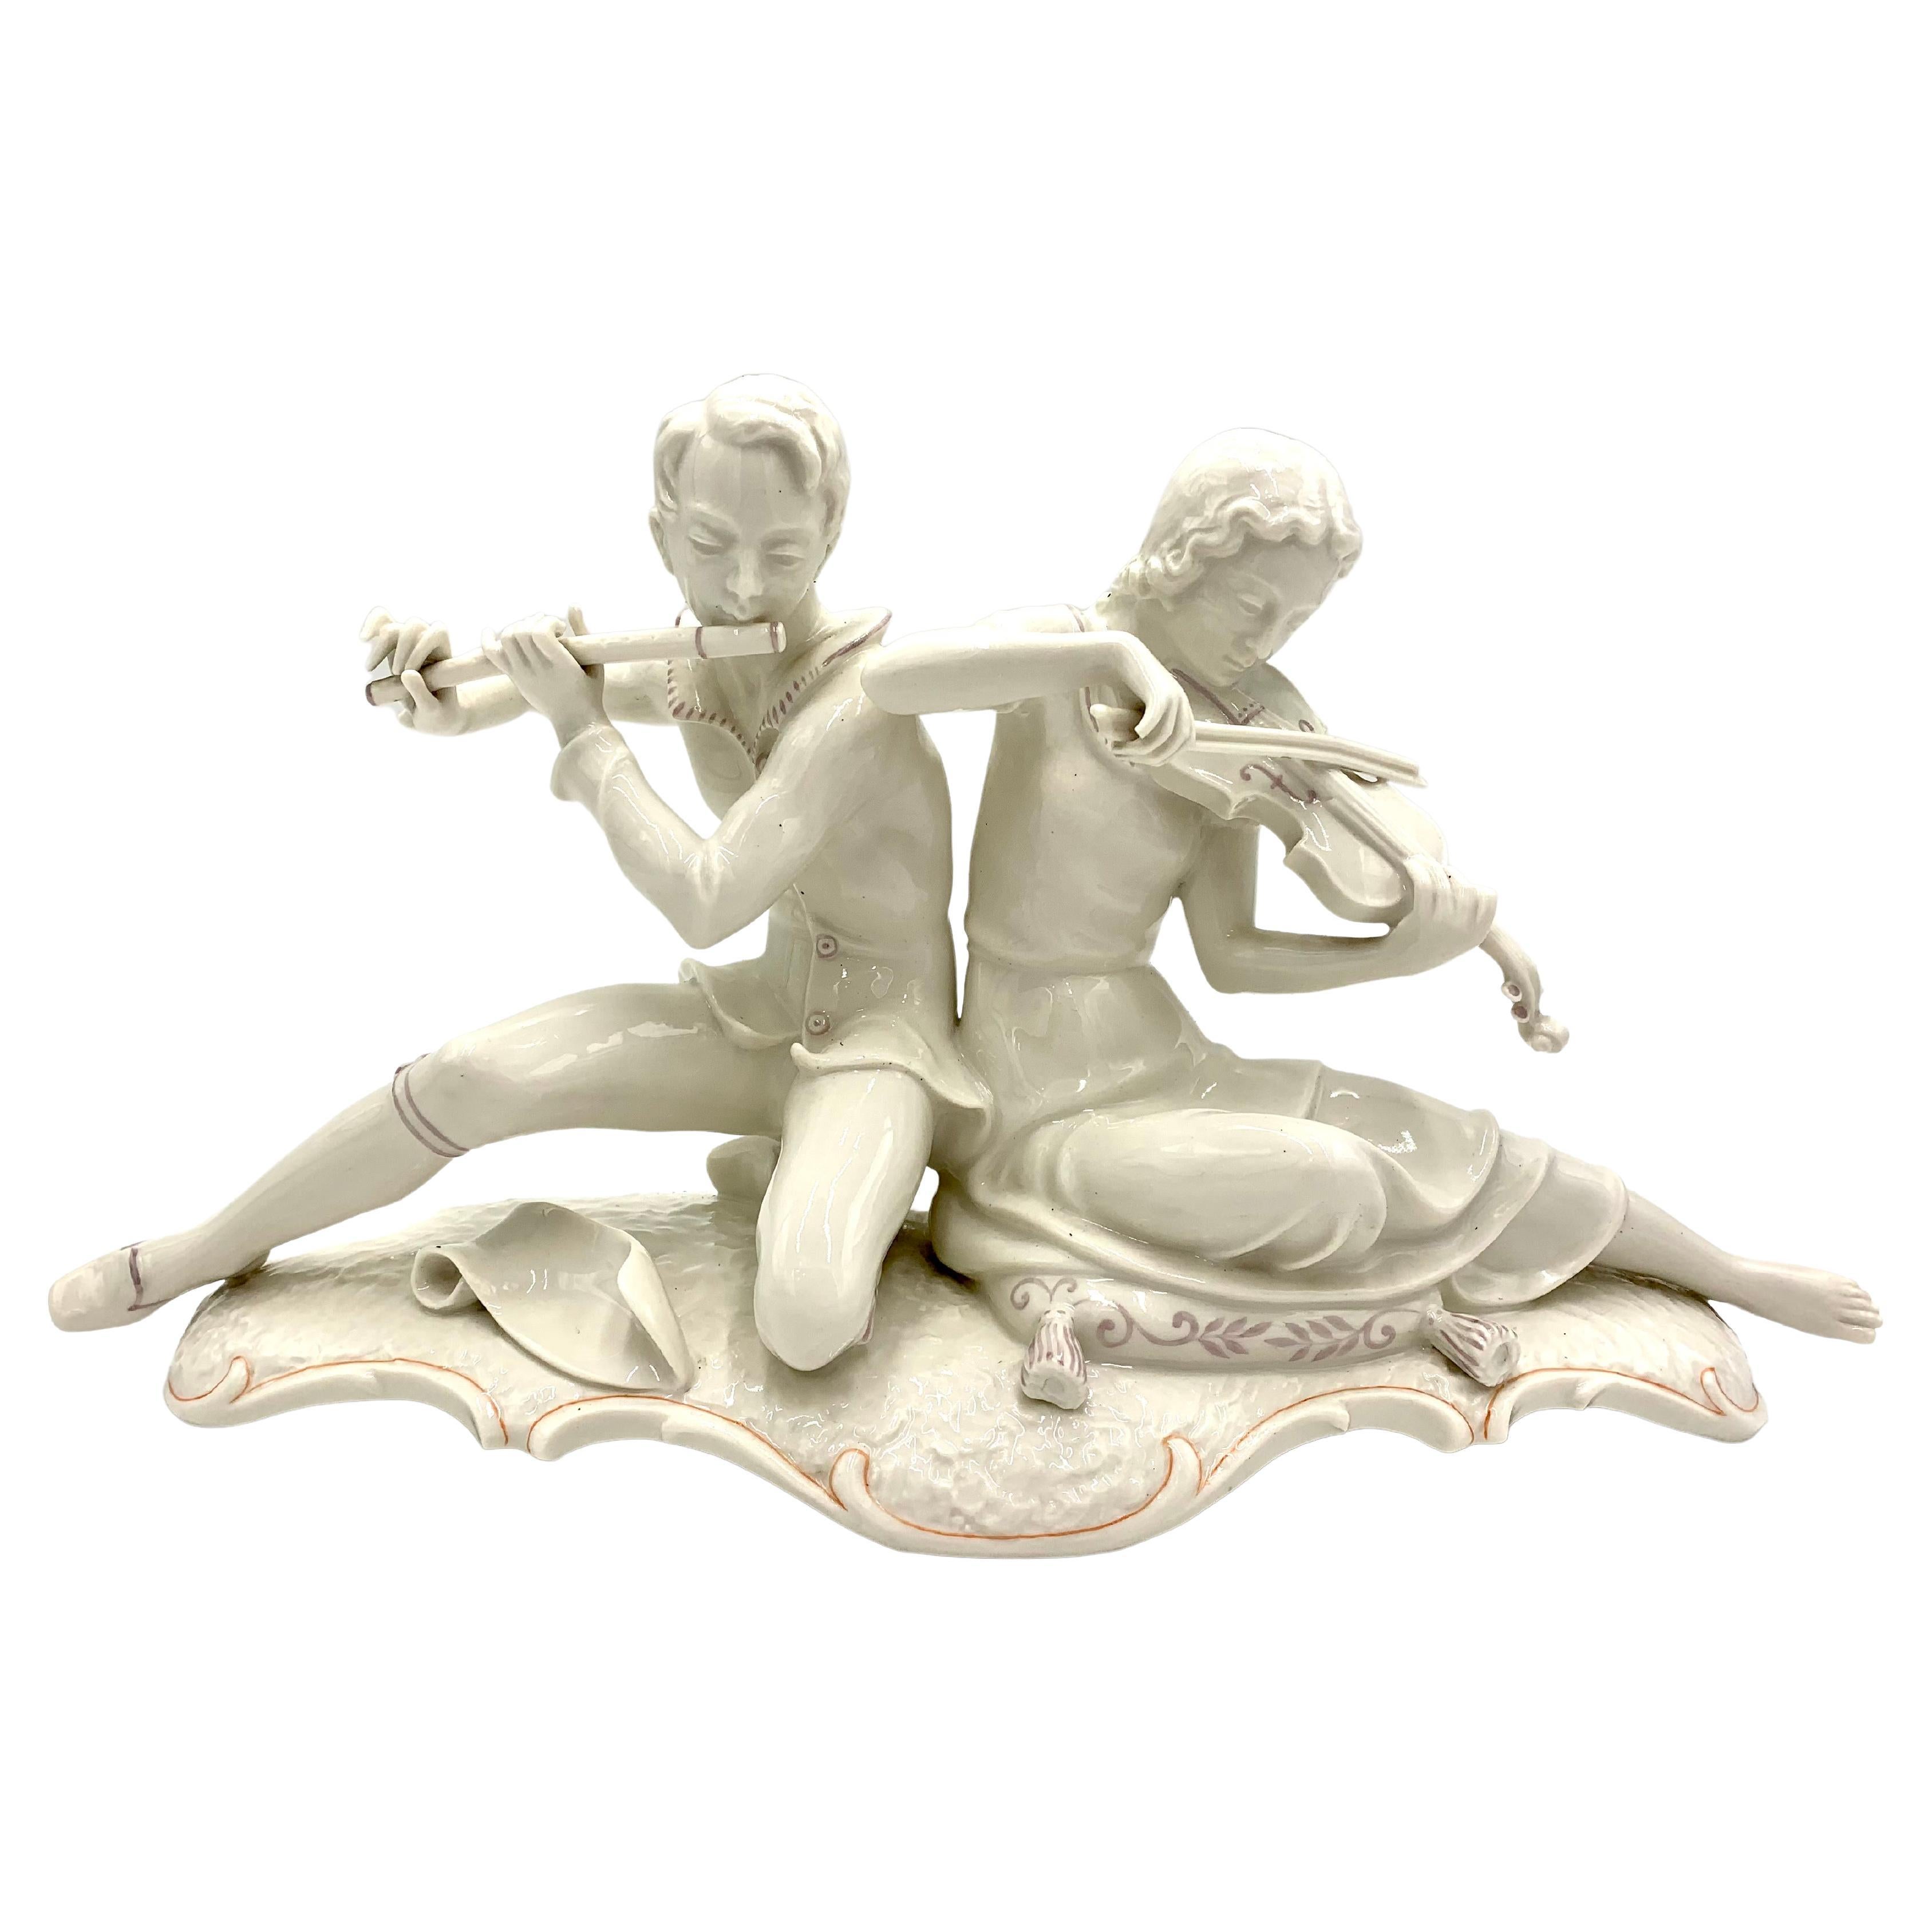 Porcelain Figurine "Two Musicians", Hutschenreuther, Germany, 50s